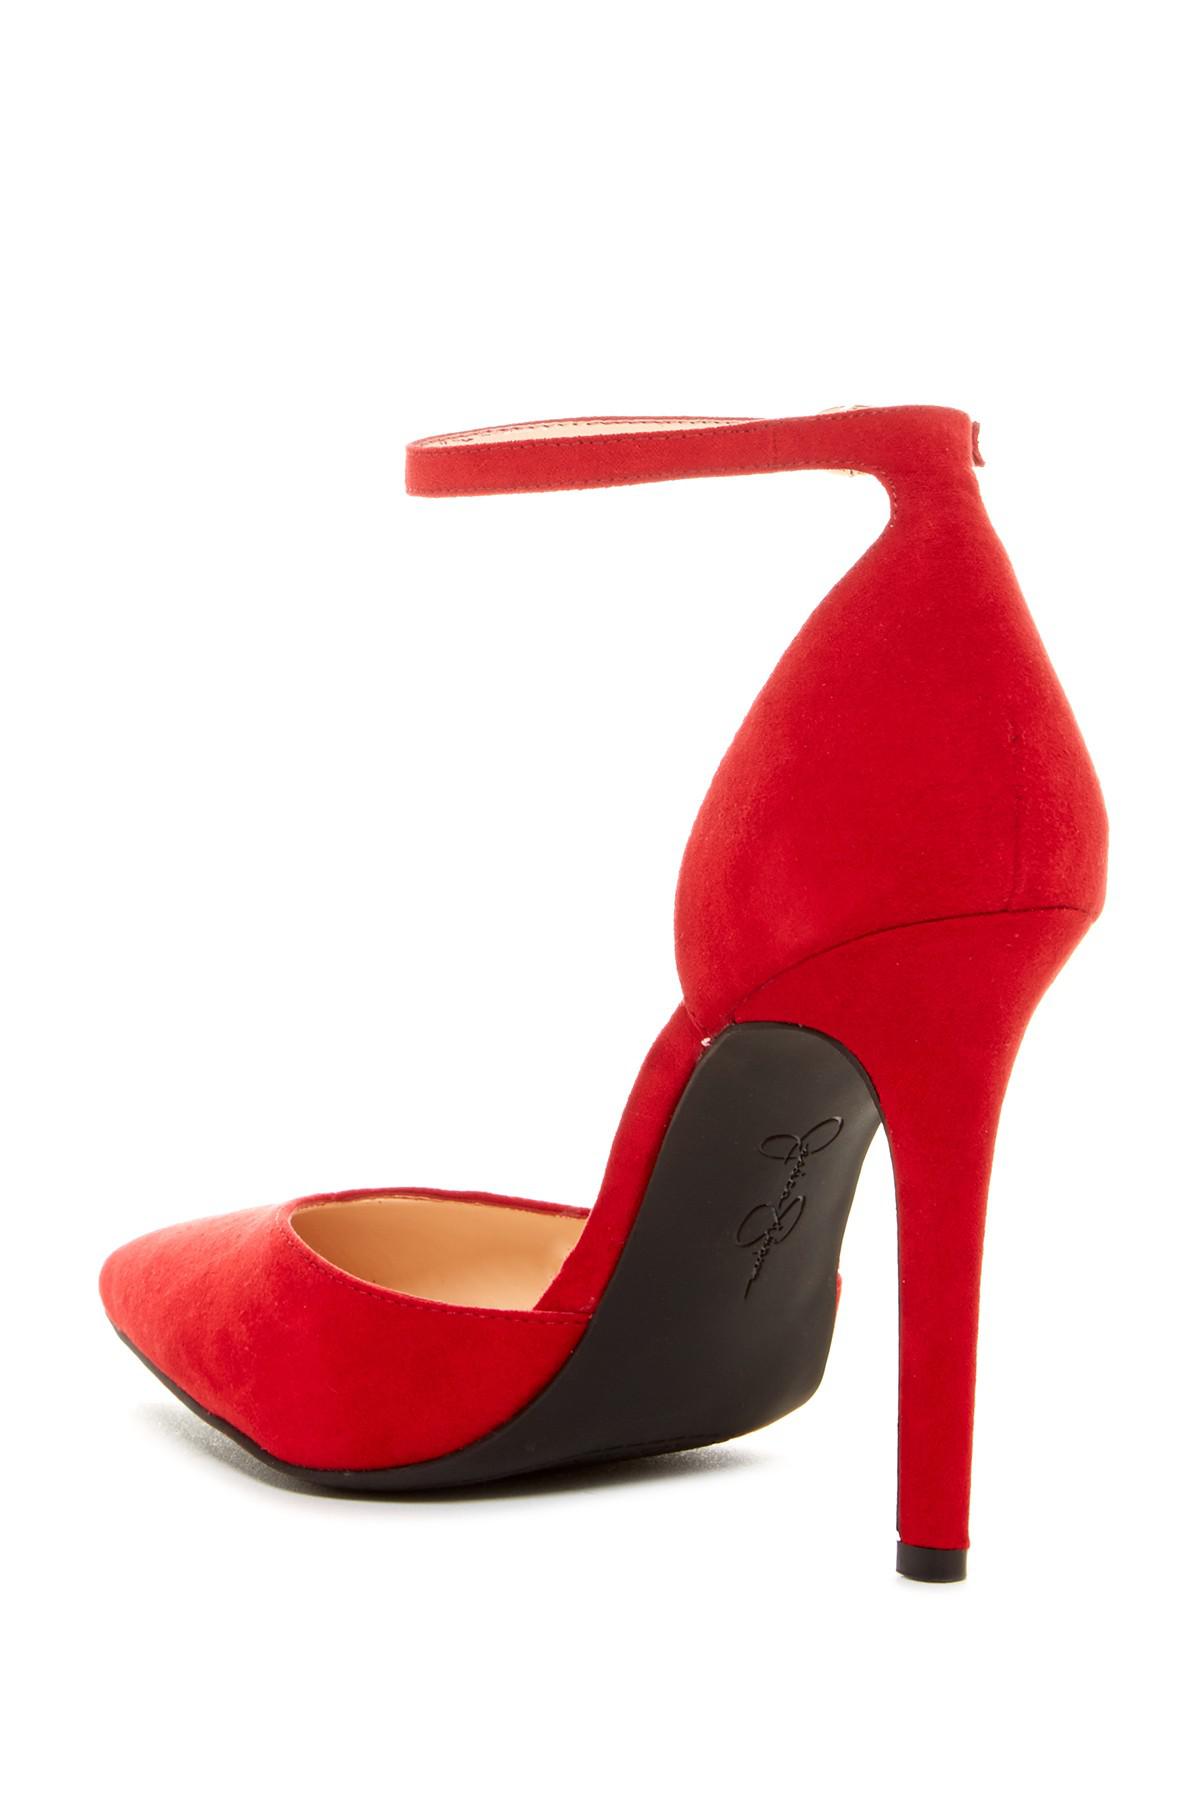 Jessica Simpson Cirrus Ankle Strap Pump in Red - Lyst